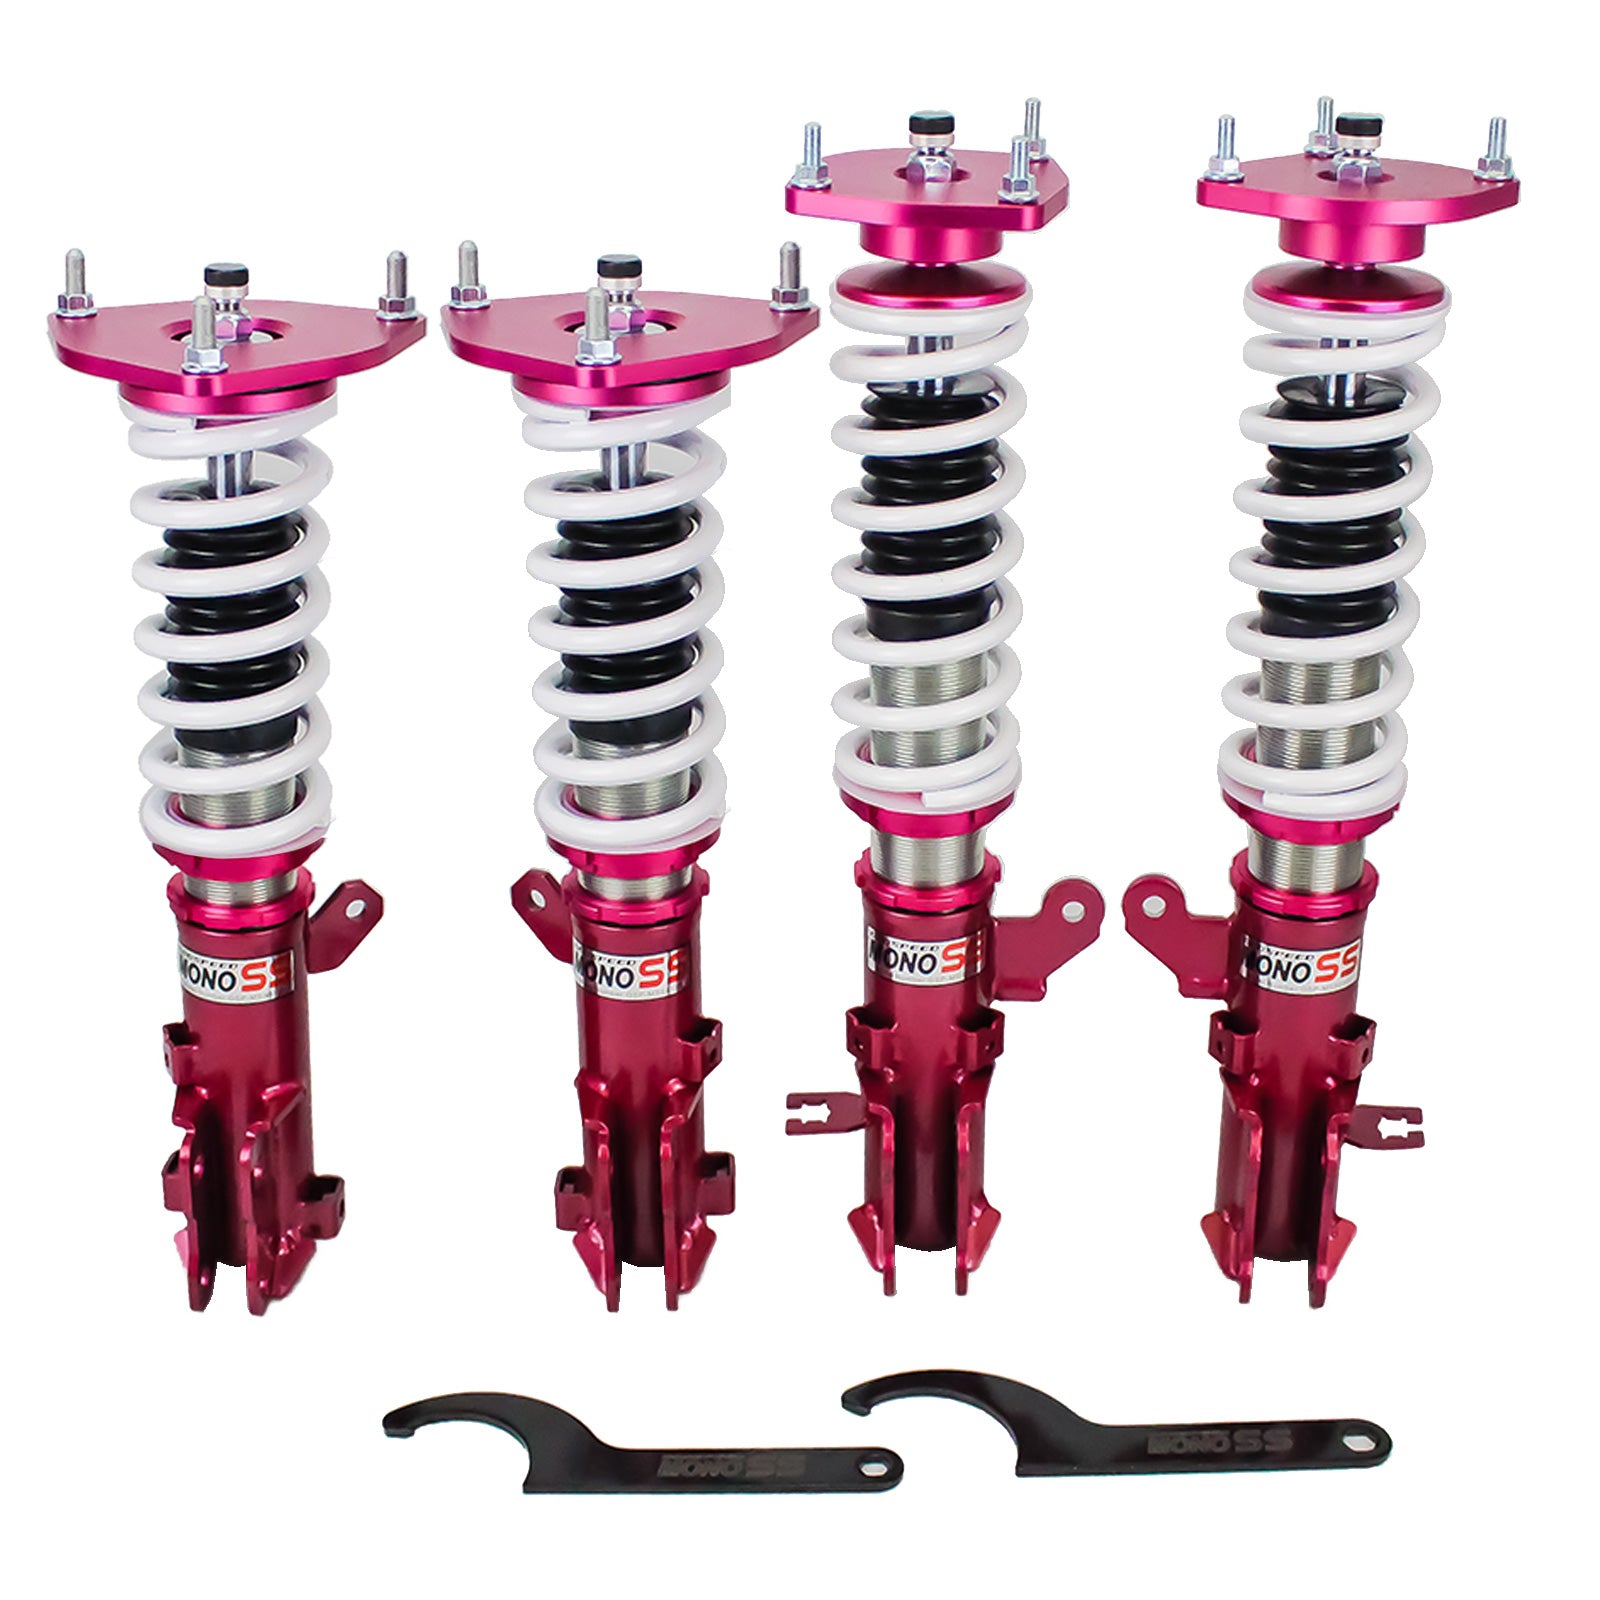 Godspeed MSS0101 MonoSS Coilover Lowering Kit, Fully Adjustable, Ride Height, Spring Tension And 16 Click Damping, Hyundai Elantra(XD) 2000-06